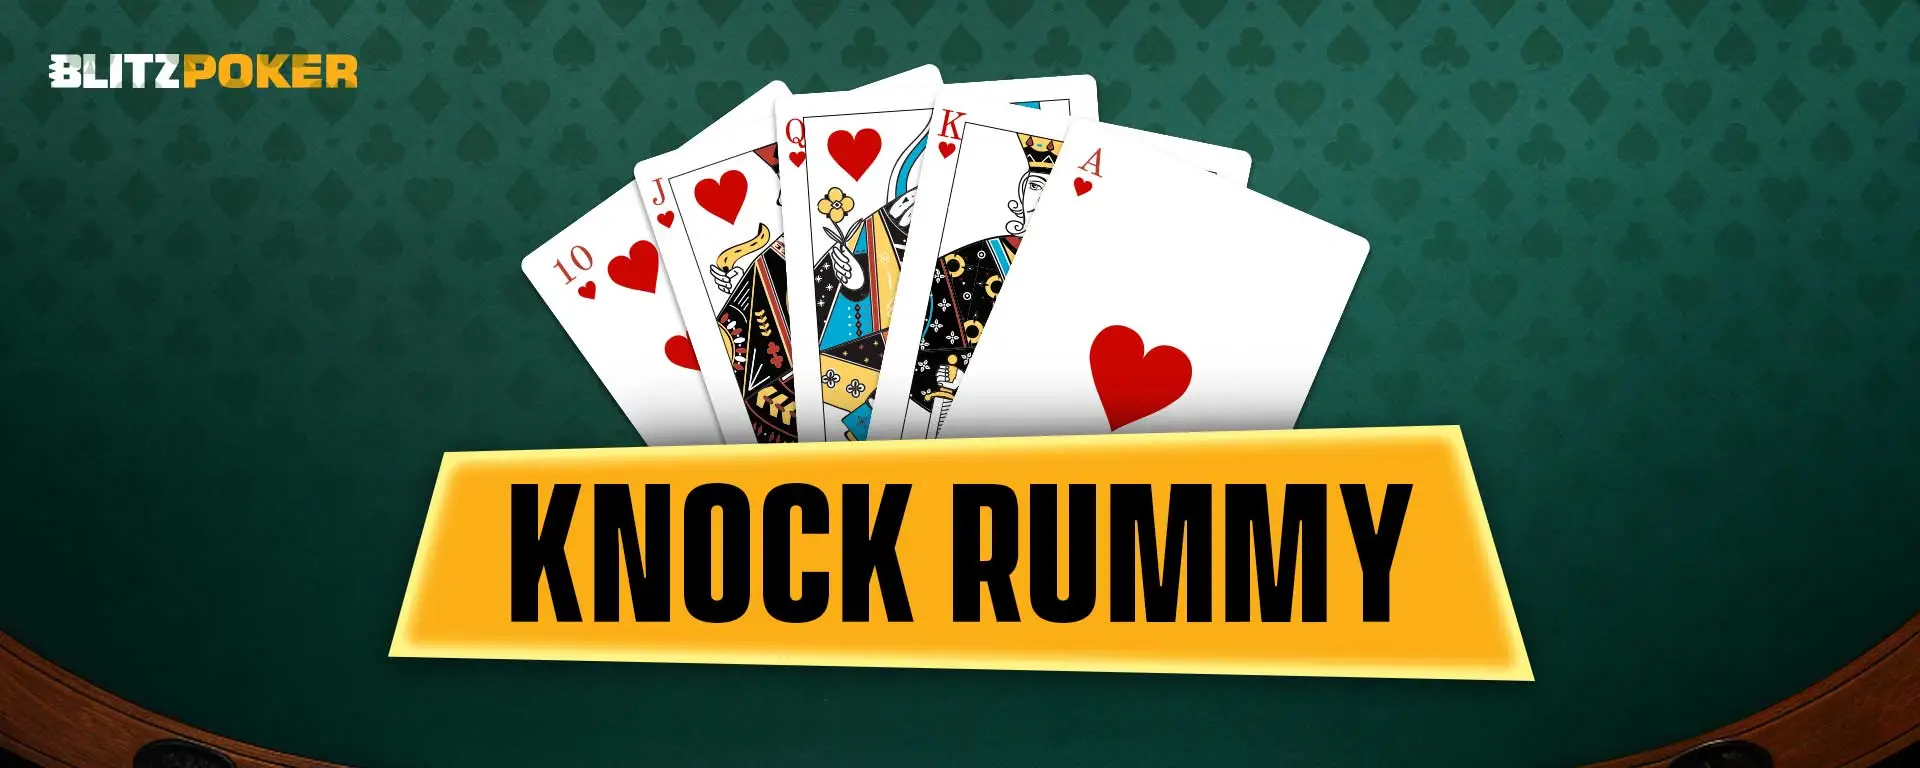 Knock Rummy Card Game: Rules, How To Play, Scoring & More